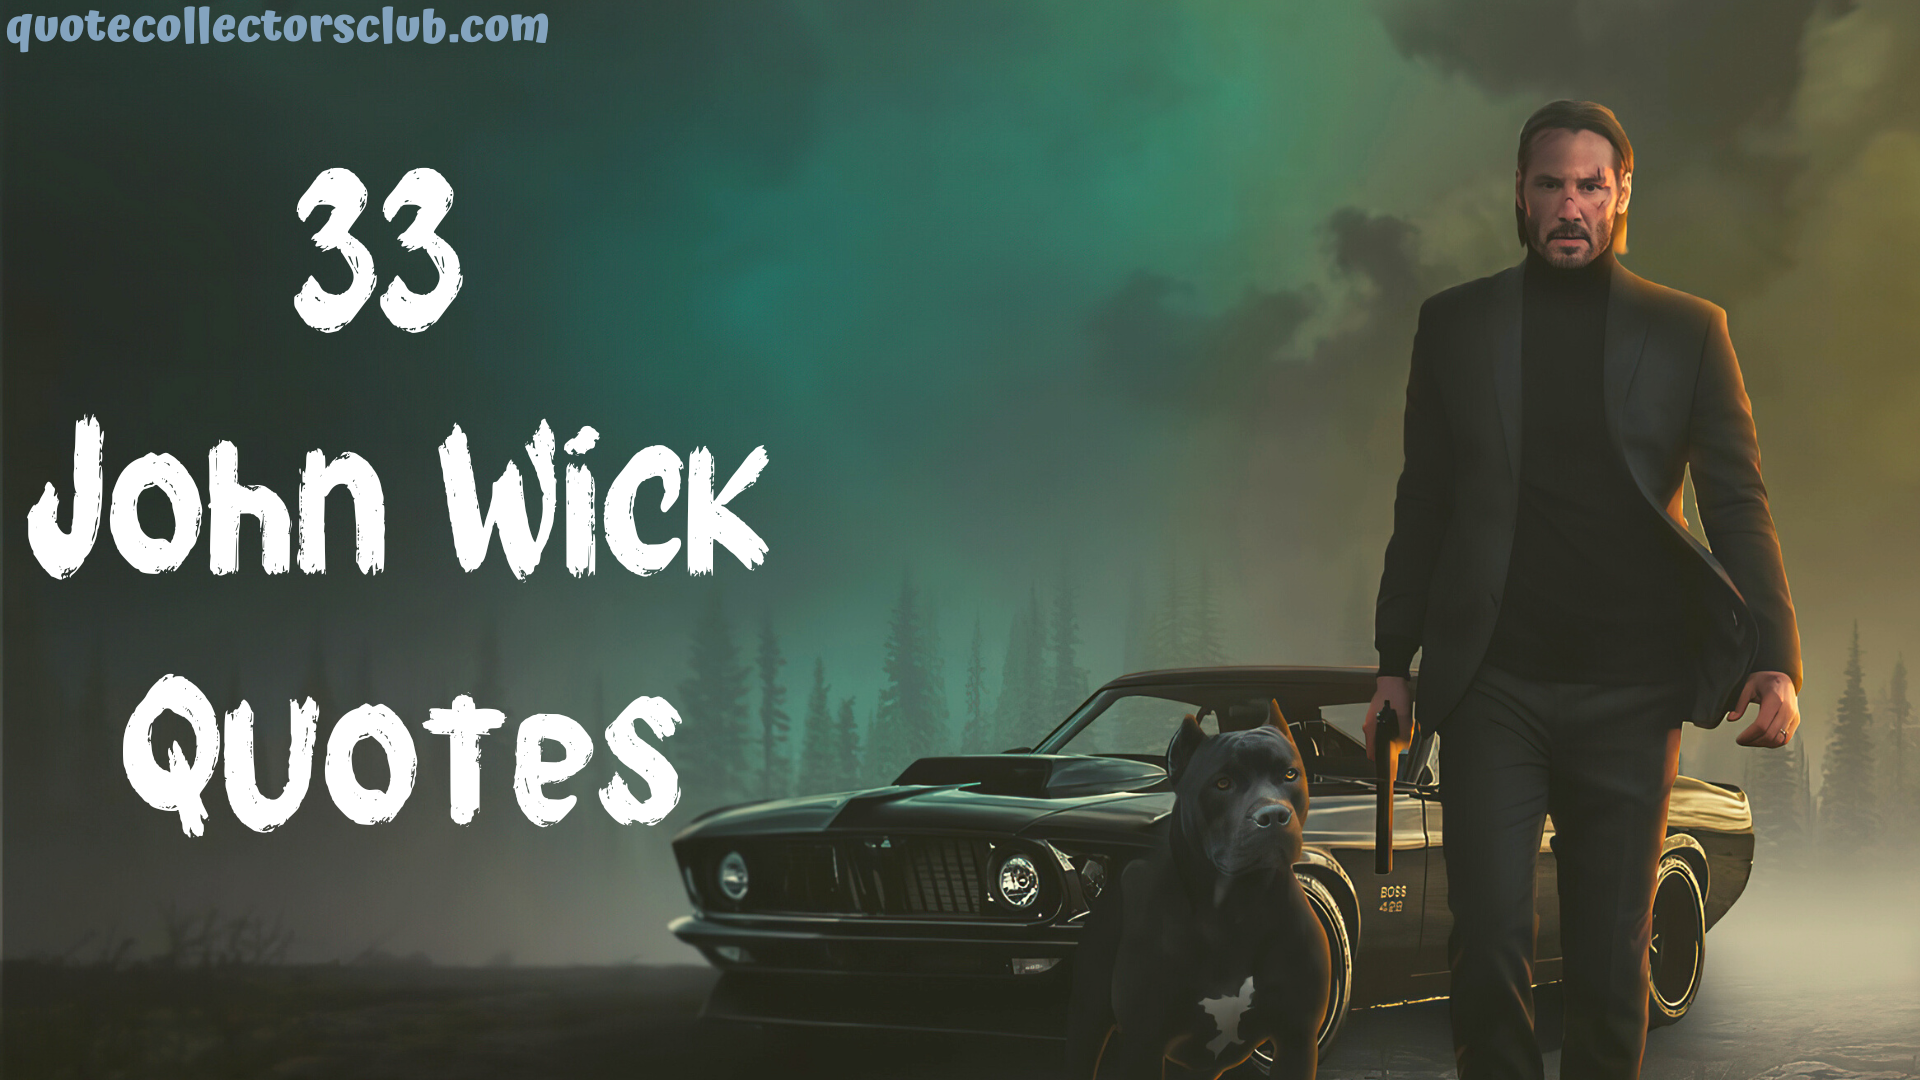 33 Badass John Wick Quotes to Wakeup Your Inner Beast - Quote Collectors  Club